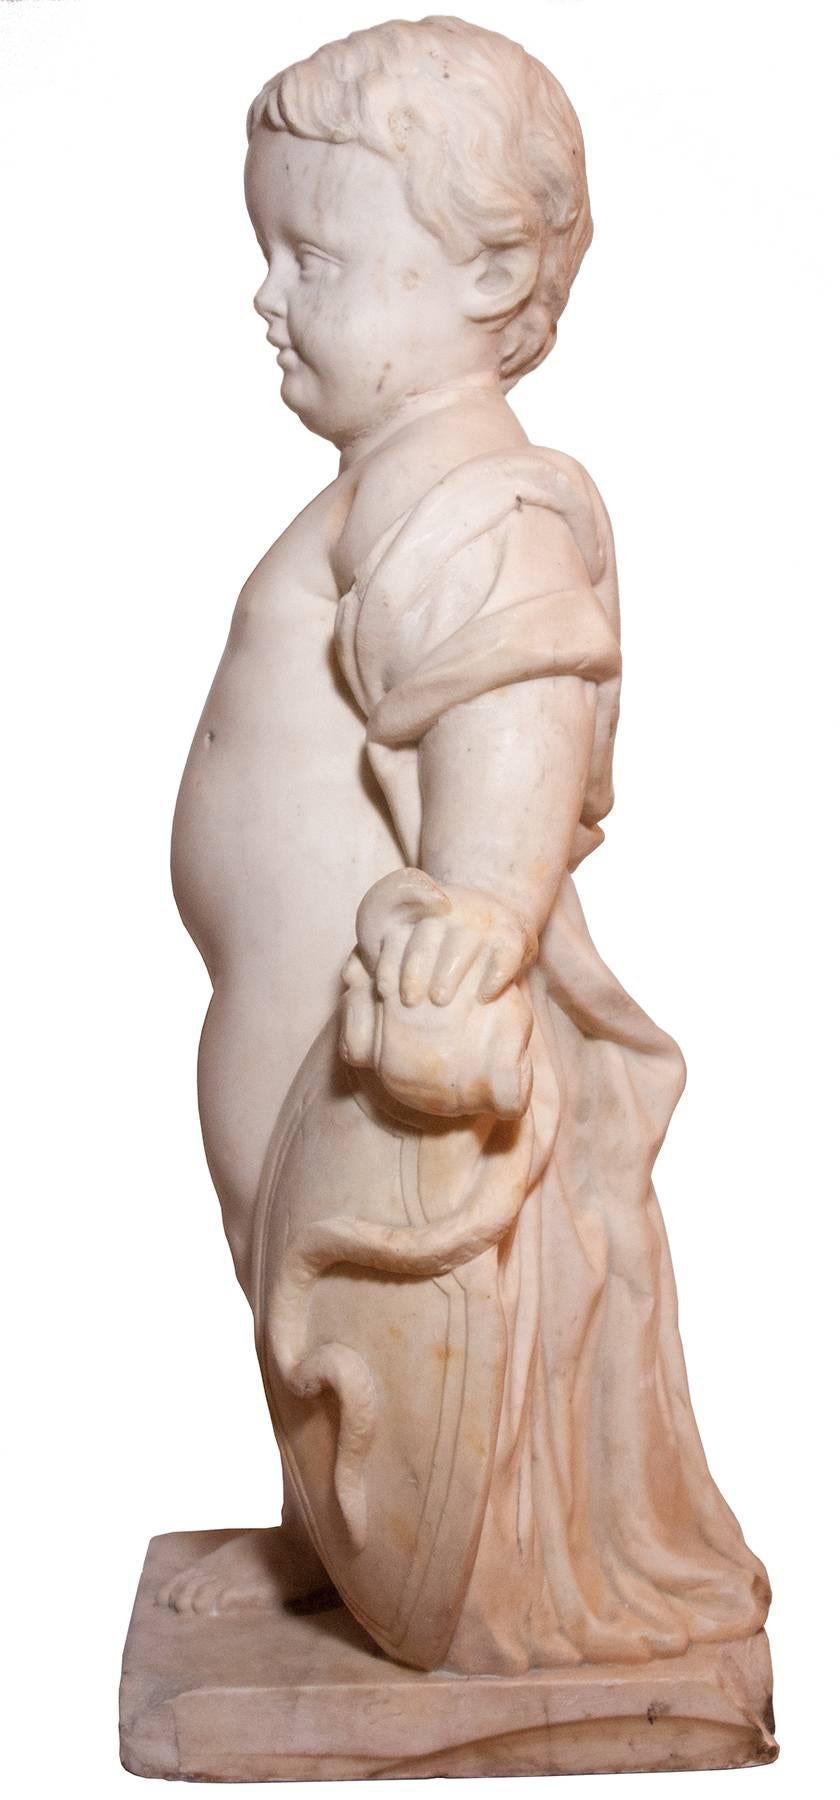 Marble child statue, Italy, late eighteenth century - Brown Figurative Sculpture by Unknown